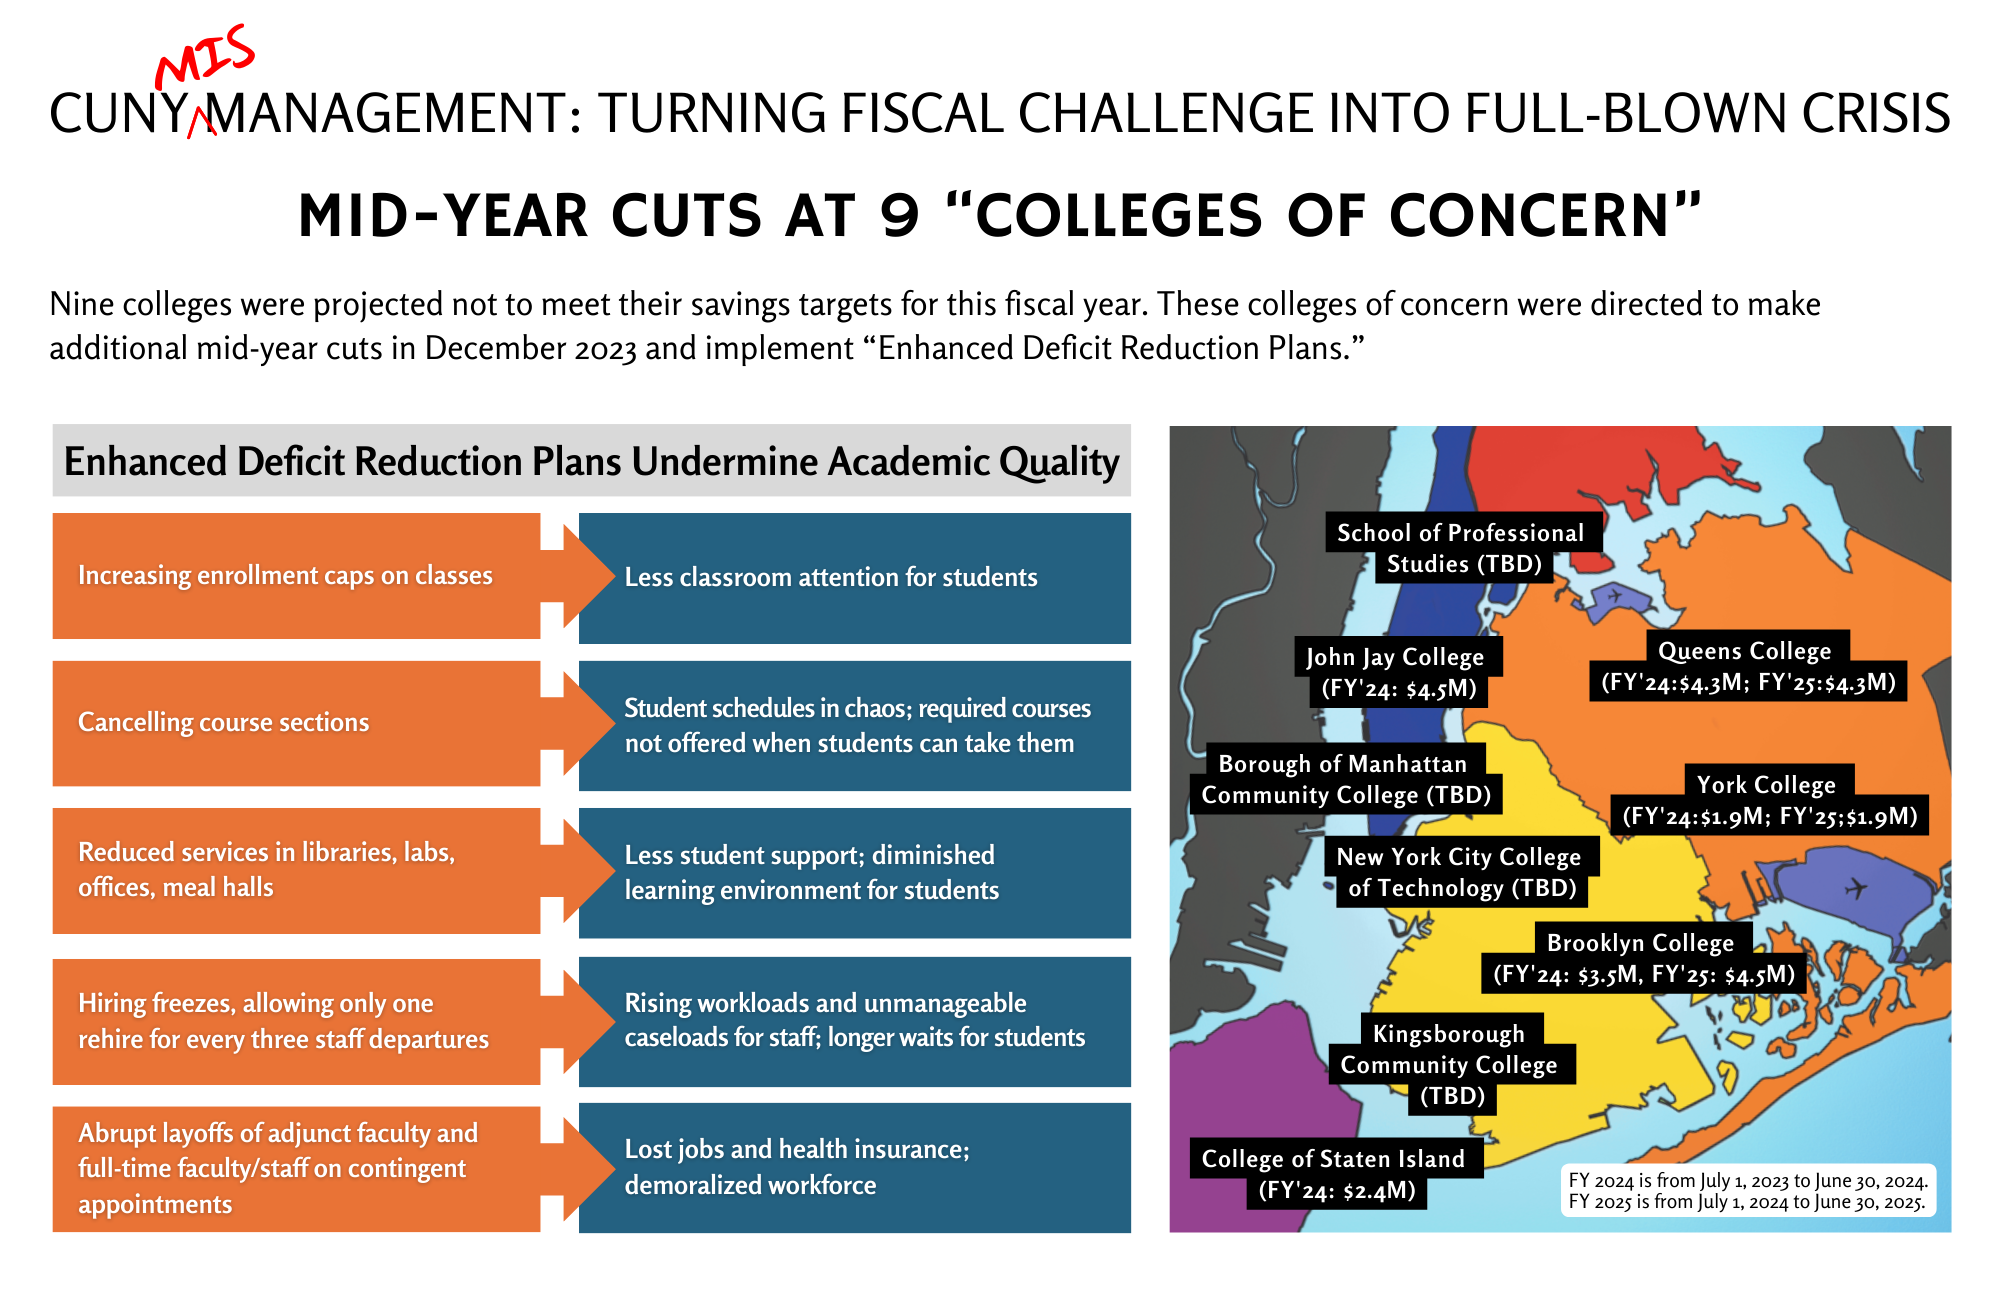 Nine colleges were projected not to meet their savings targets for this fiscal year. These colleges of concern were directed to make additional mid-year cuts in December 2023 and implement “Enhanced Deficit Reduction Plans.”